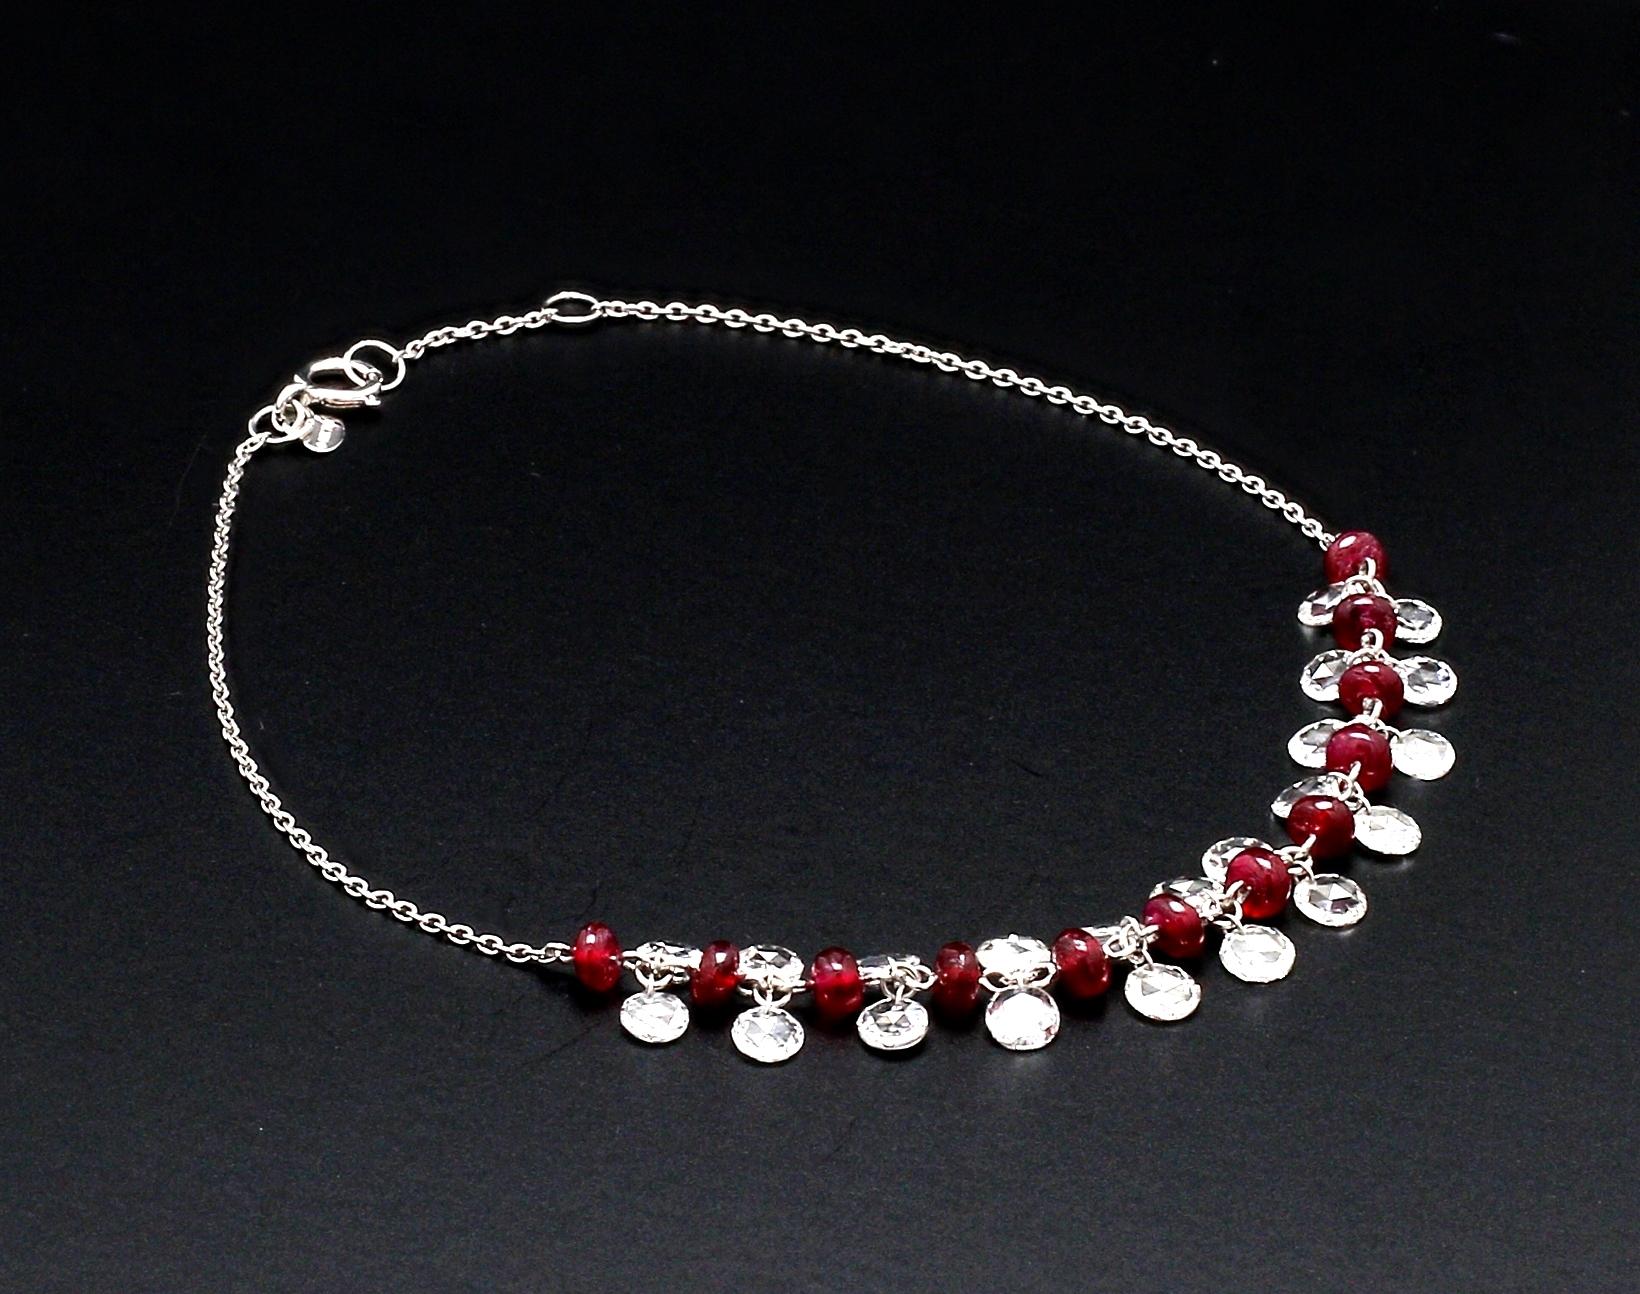 PANIM Rose Cut Diamond and Ruby Dangling Bracelet in 18 Karat White Gold In New Condition For Sale In Tsim Sha Tsui, Hong Kong